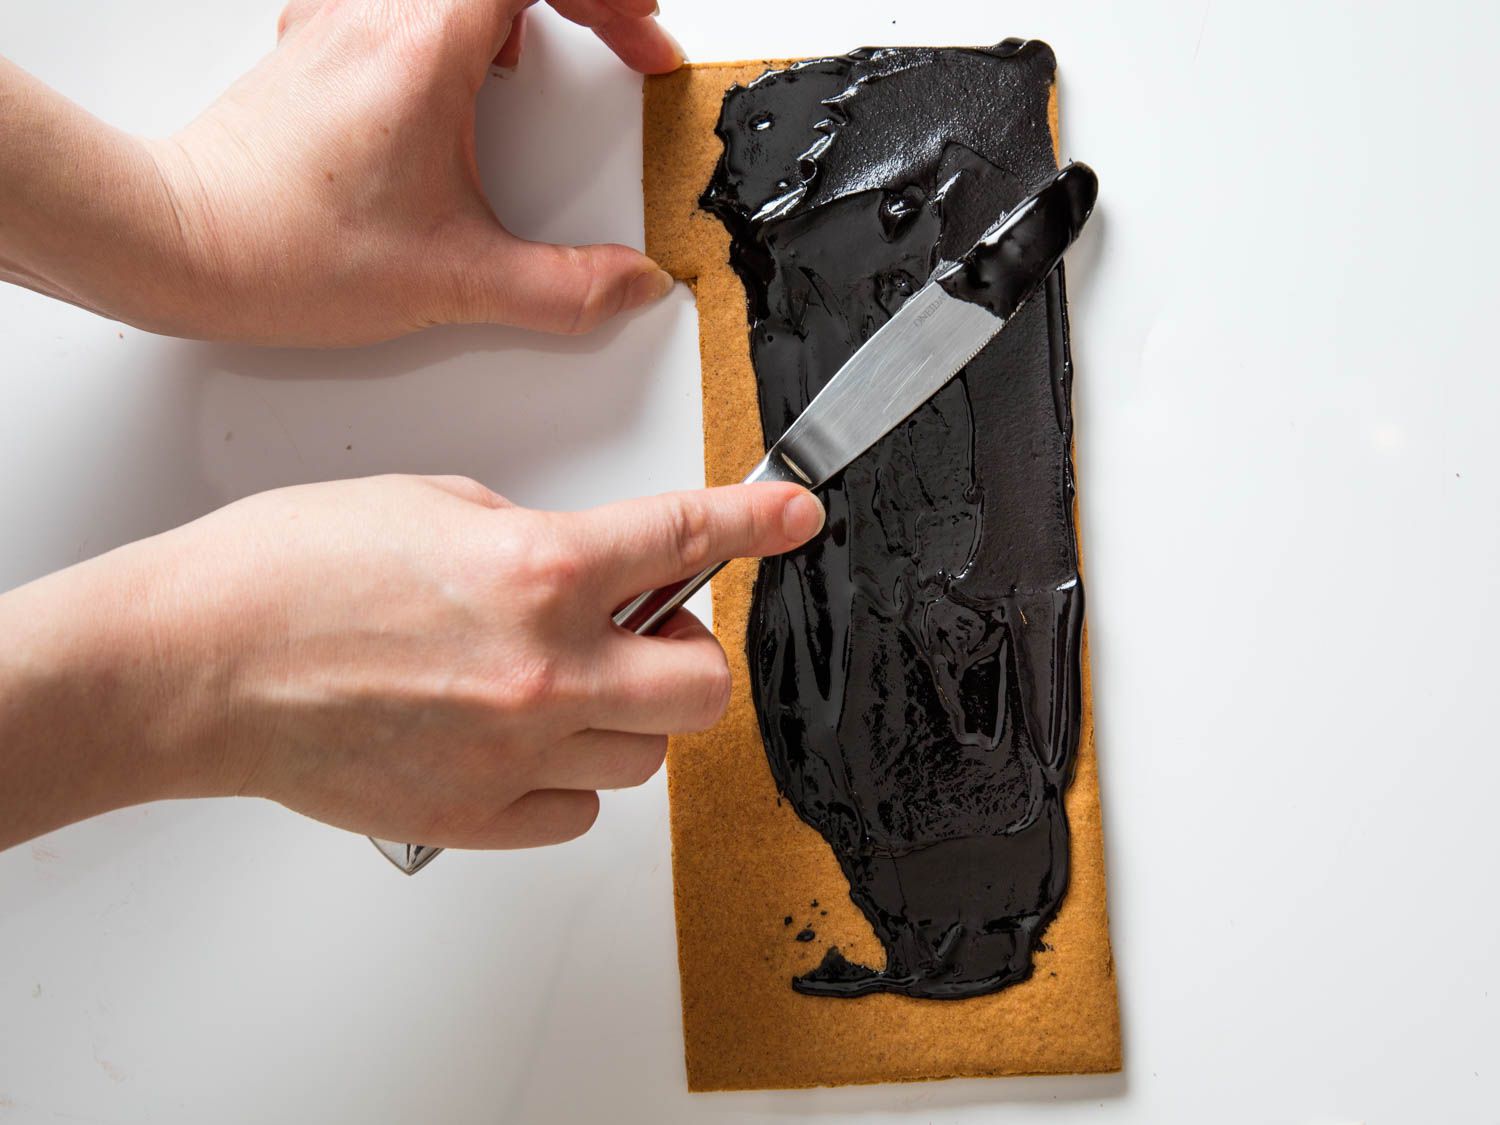 Painting black frosting over a piece of gingerbread to make a haunted-house roof